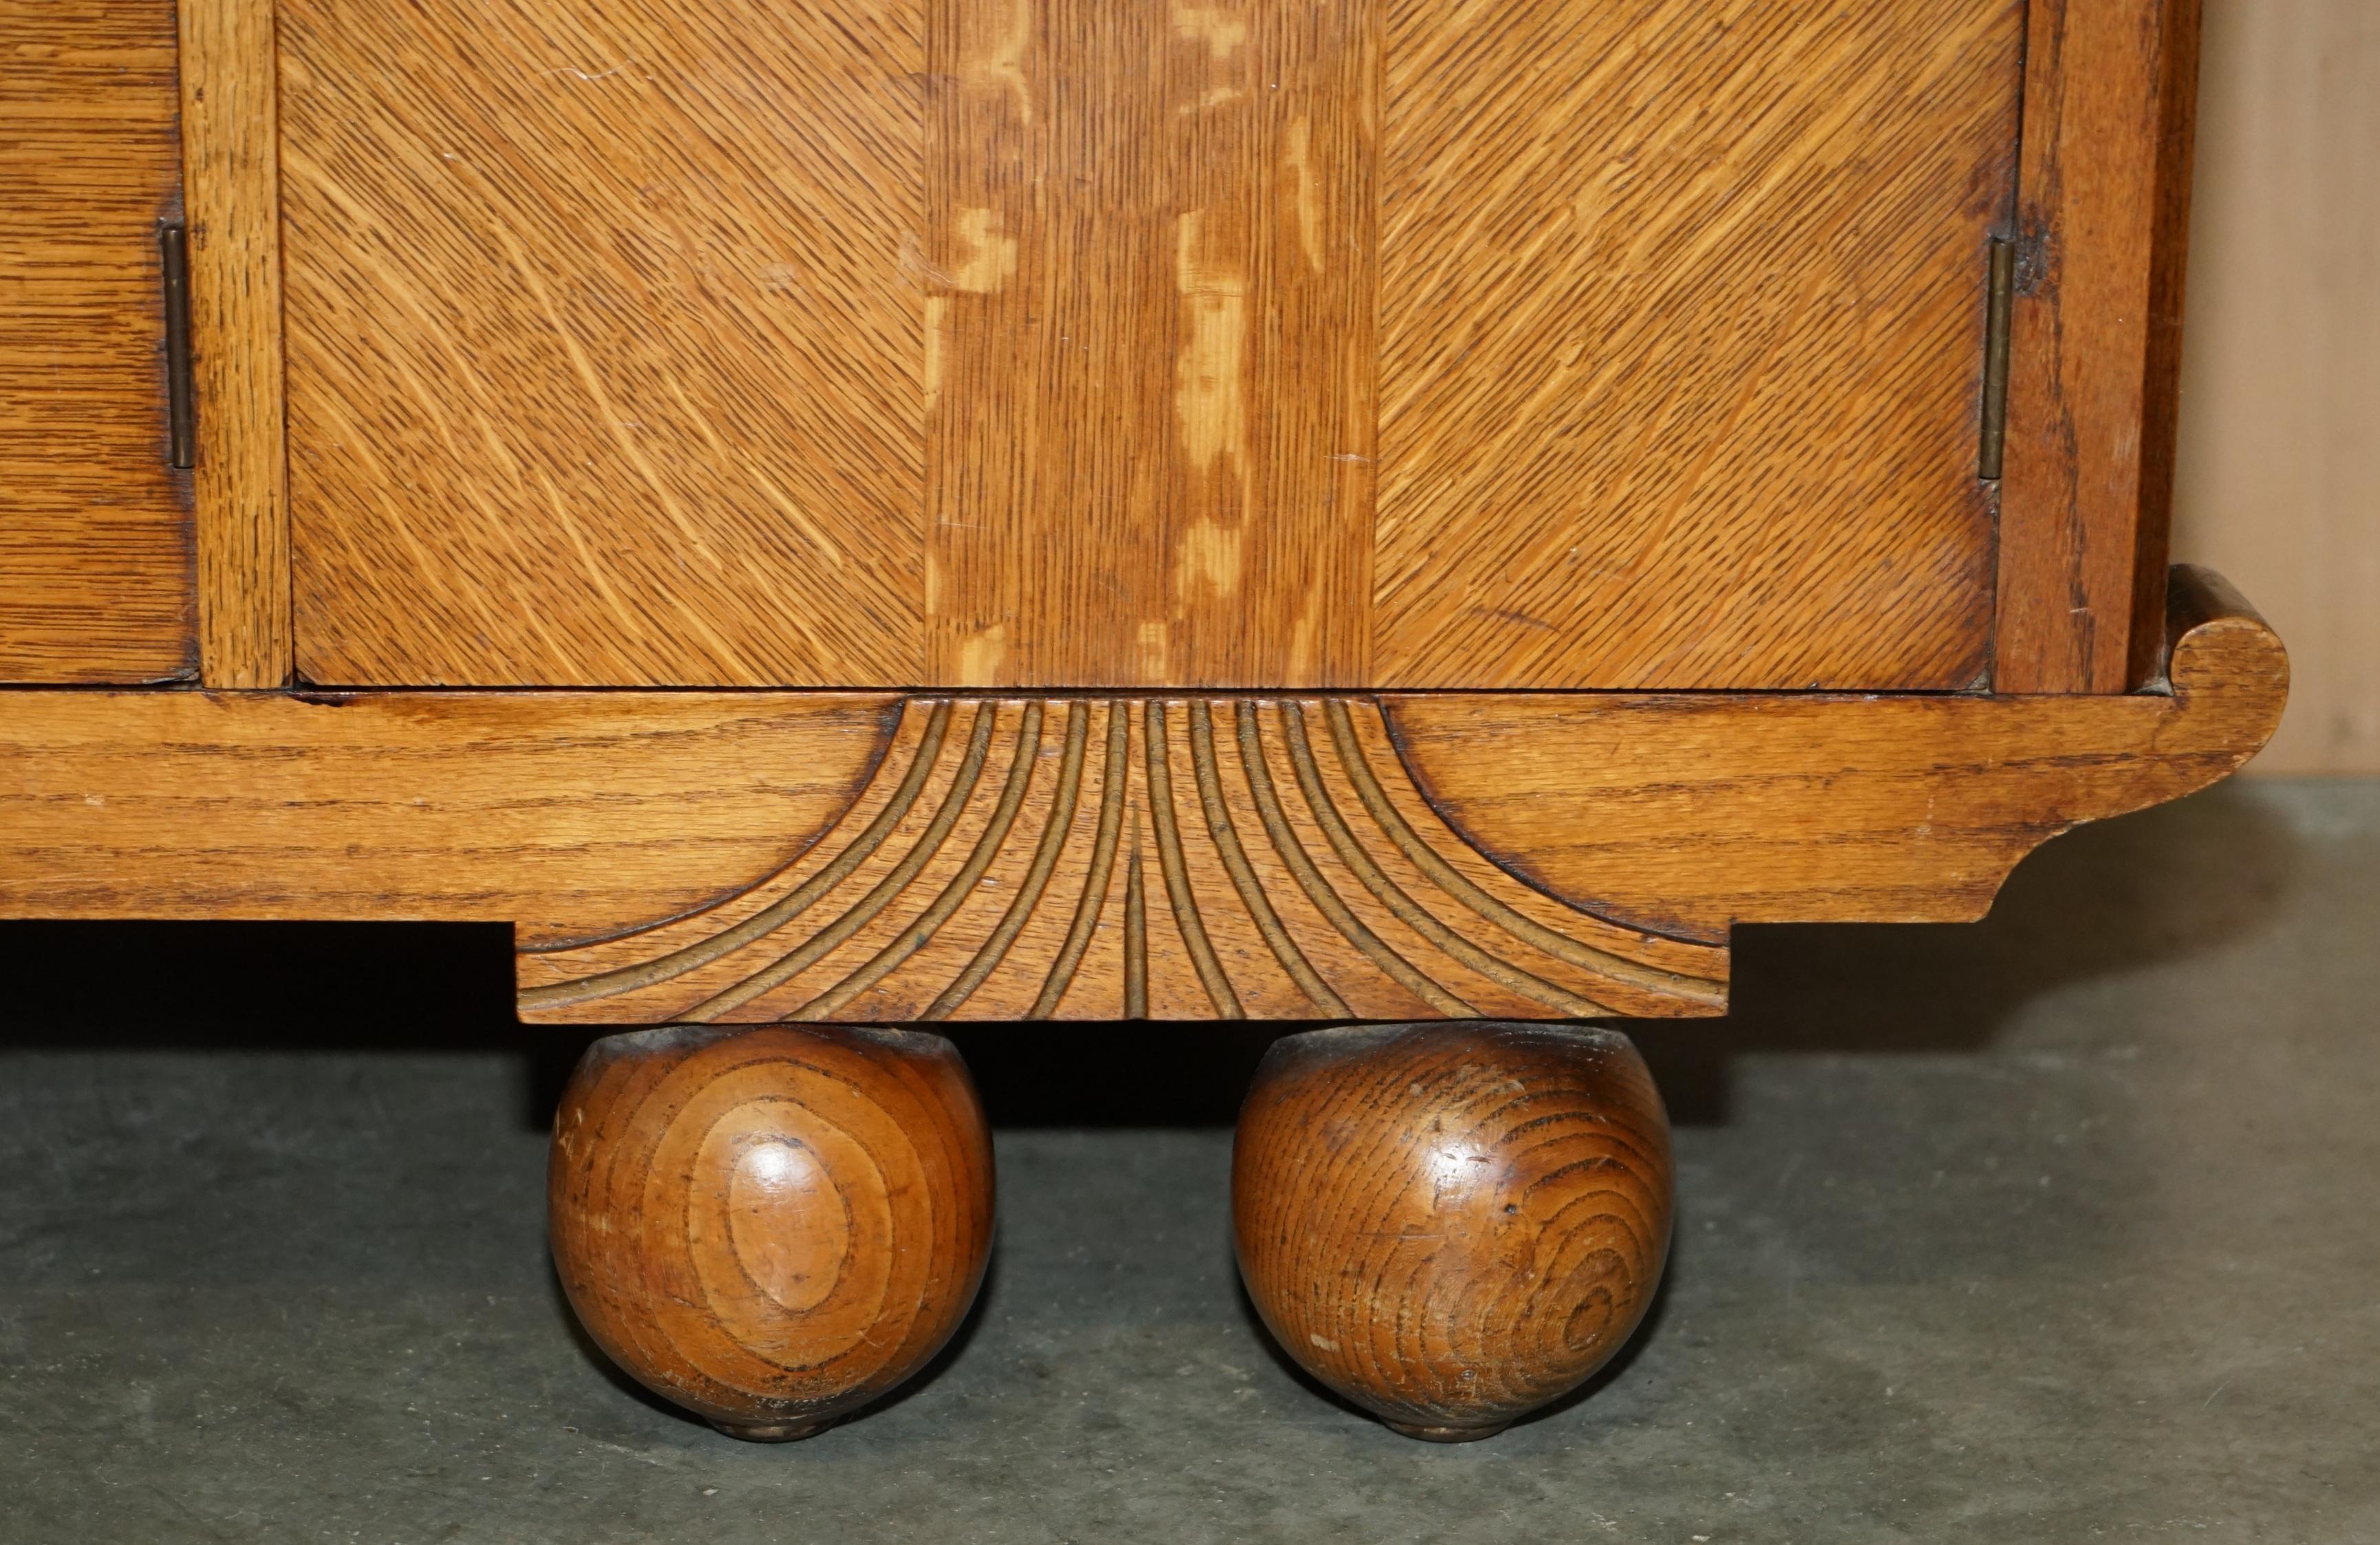 FINE LIBERTY'S COTSWOLD ART DECO OAK CARVED SiDEBOARD CIRCA 1920 PART OF A SUITE For Sale 4